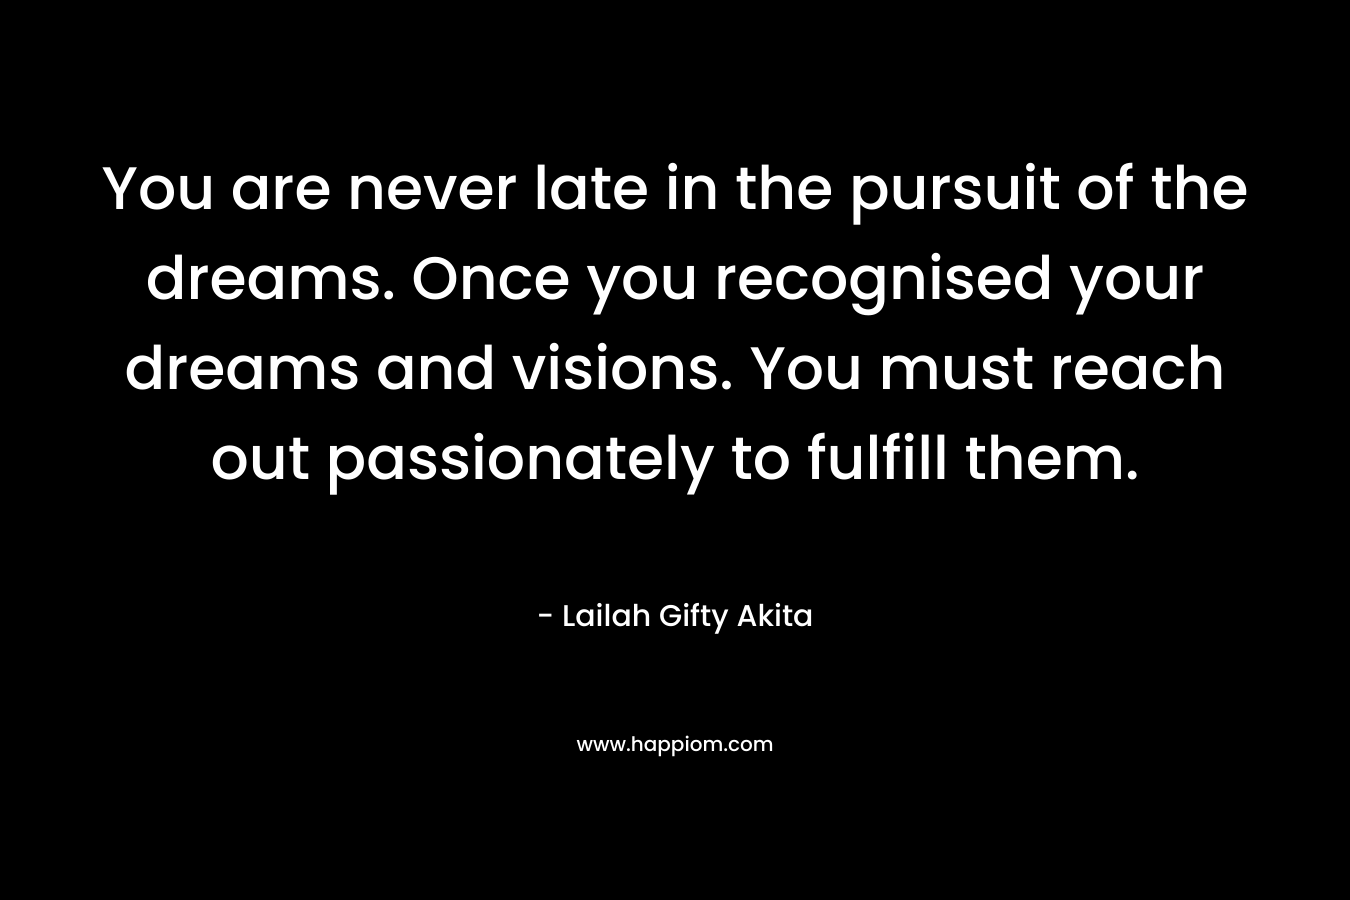 You are never late in the pursuit of the dreams. Once you recognised your dreams and visions. You must reach out passionately to fulfill them.